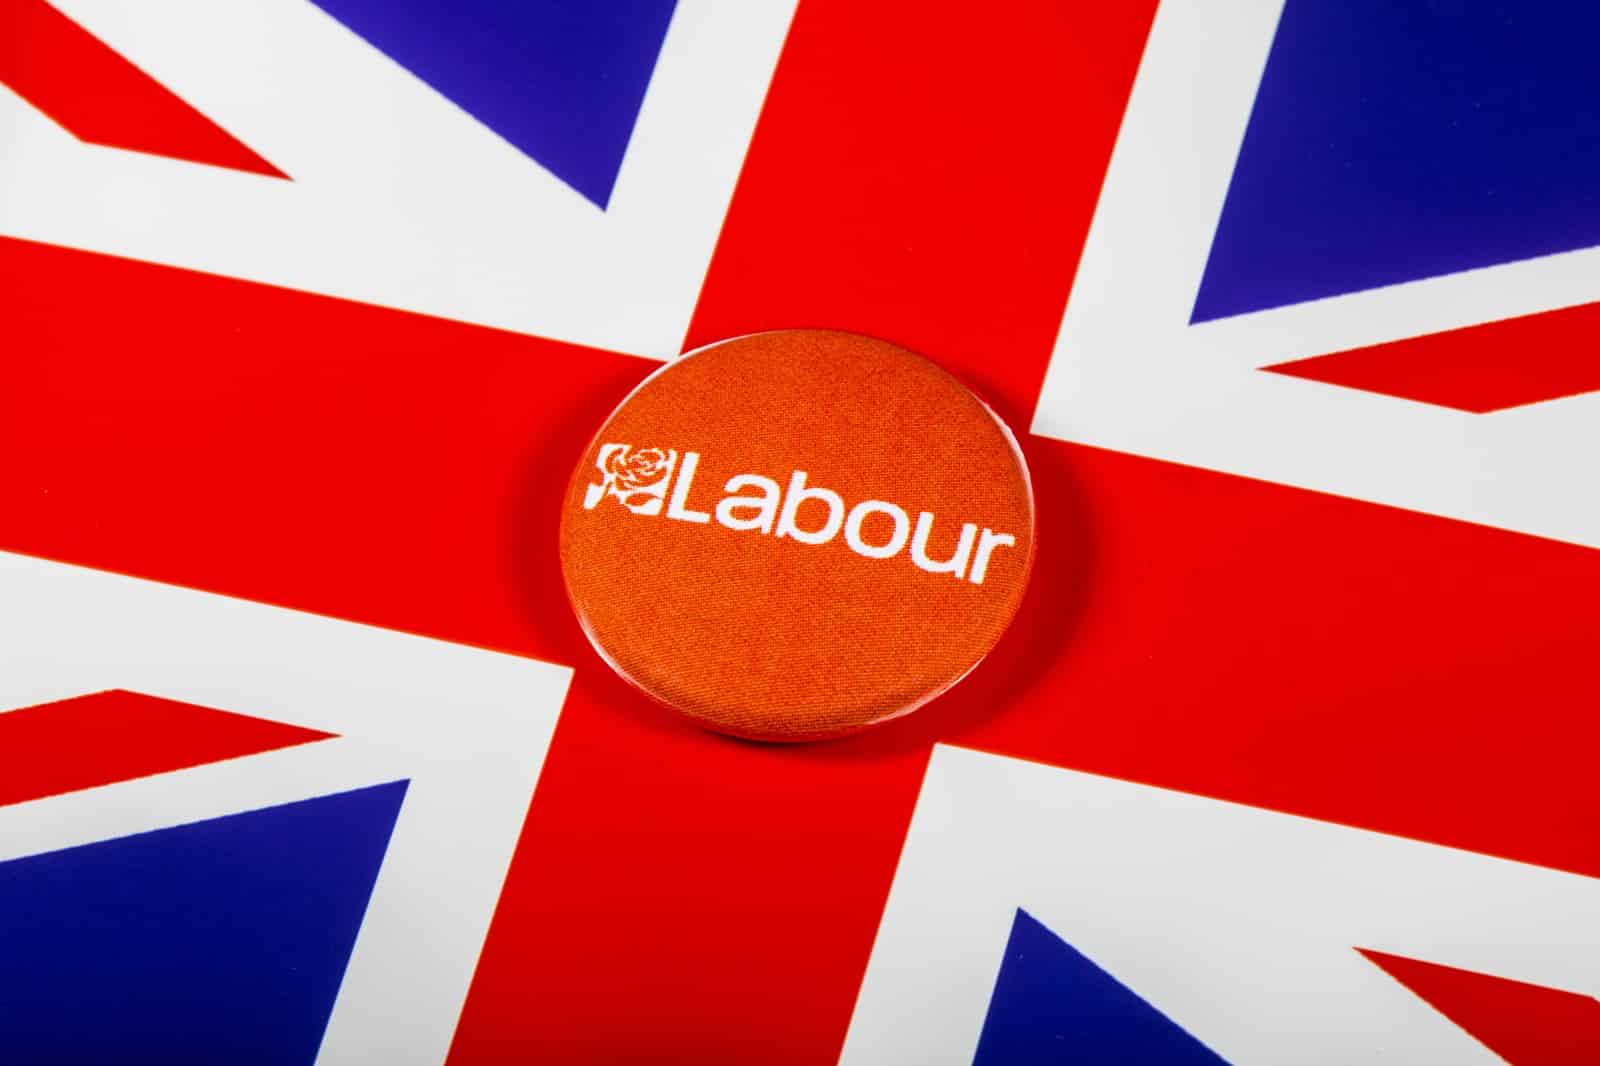 Image Credit: Shutterstock / chrisdorney <p><span>Benton spoke about what a potential Labour government would do to the country, insisting, “A Labour government would be catastrophic for our country.”</span></p>